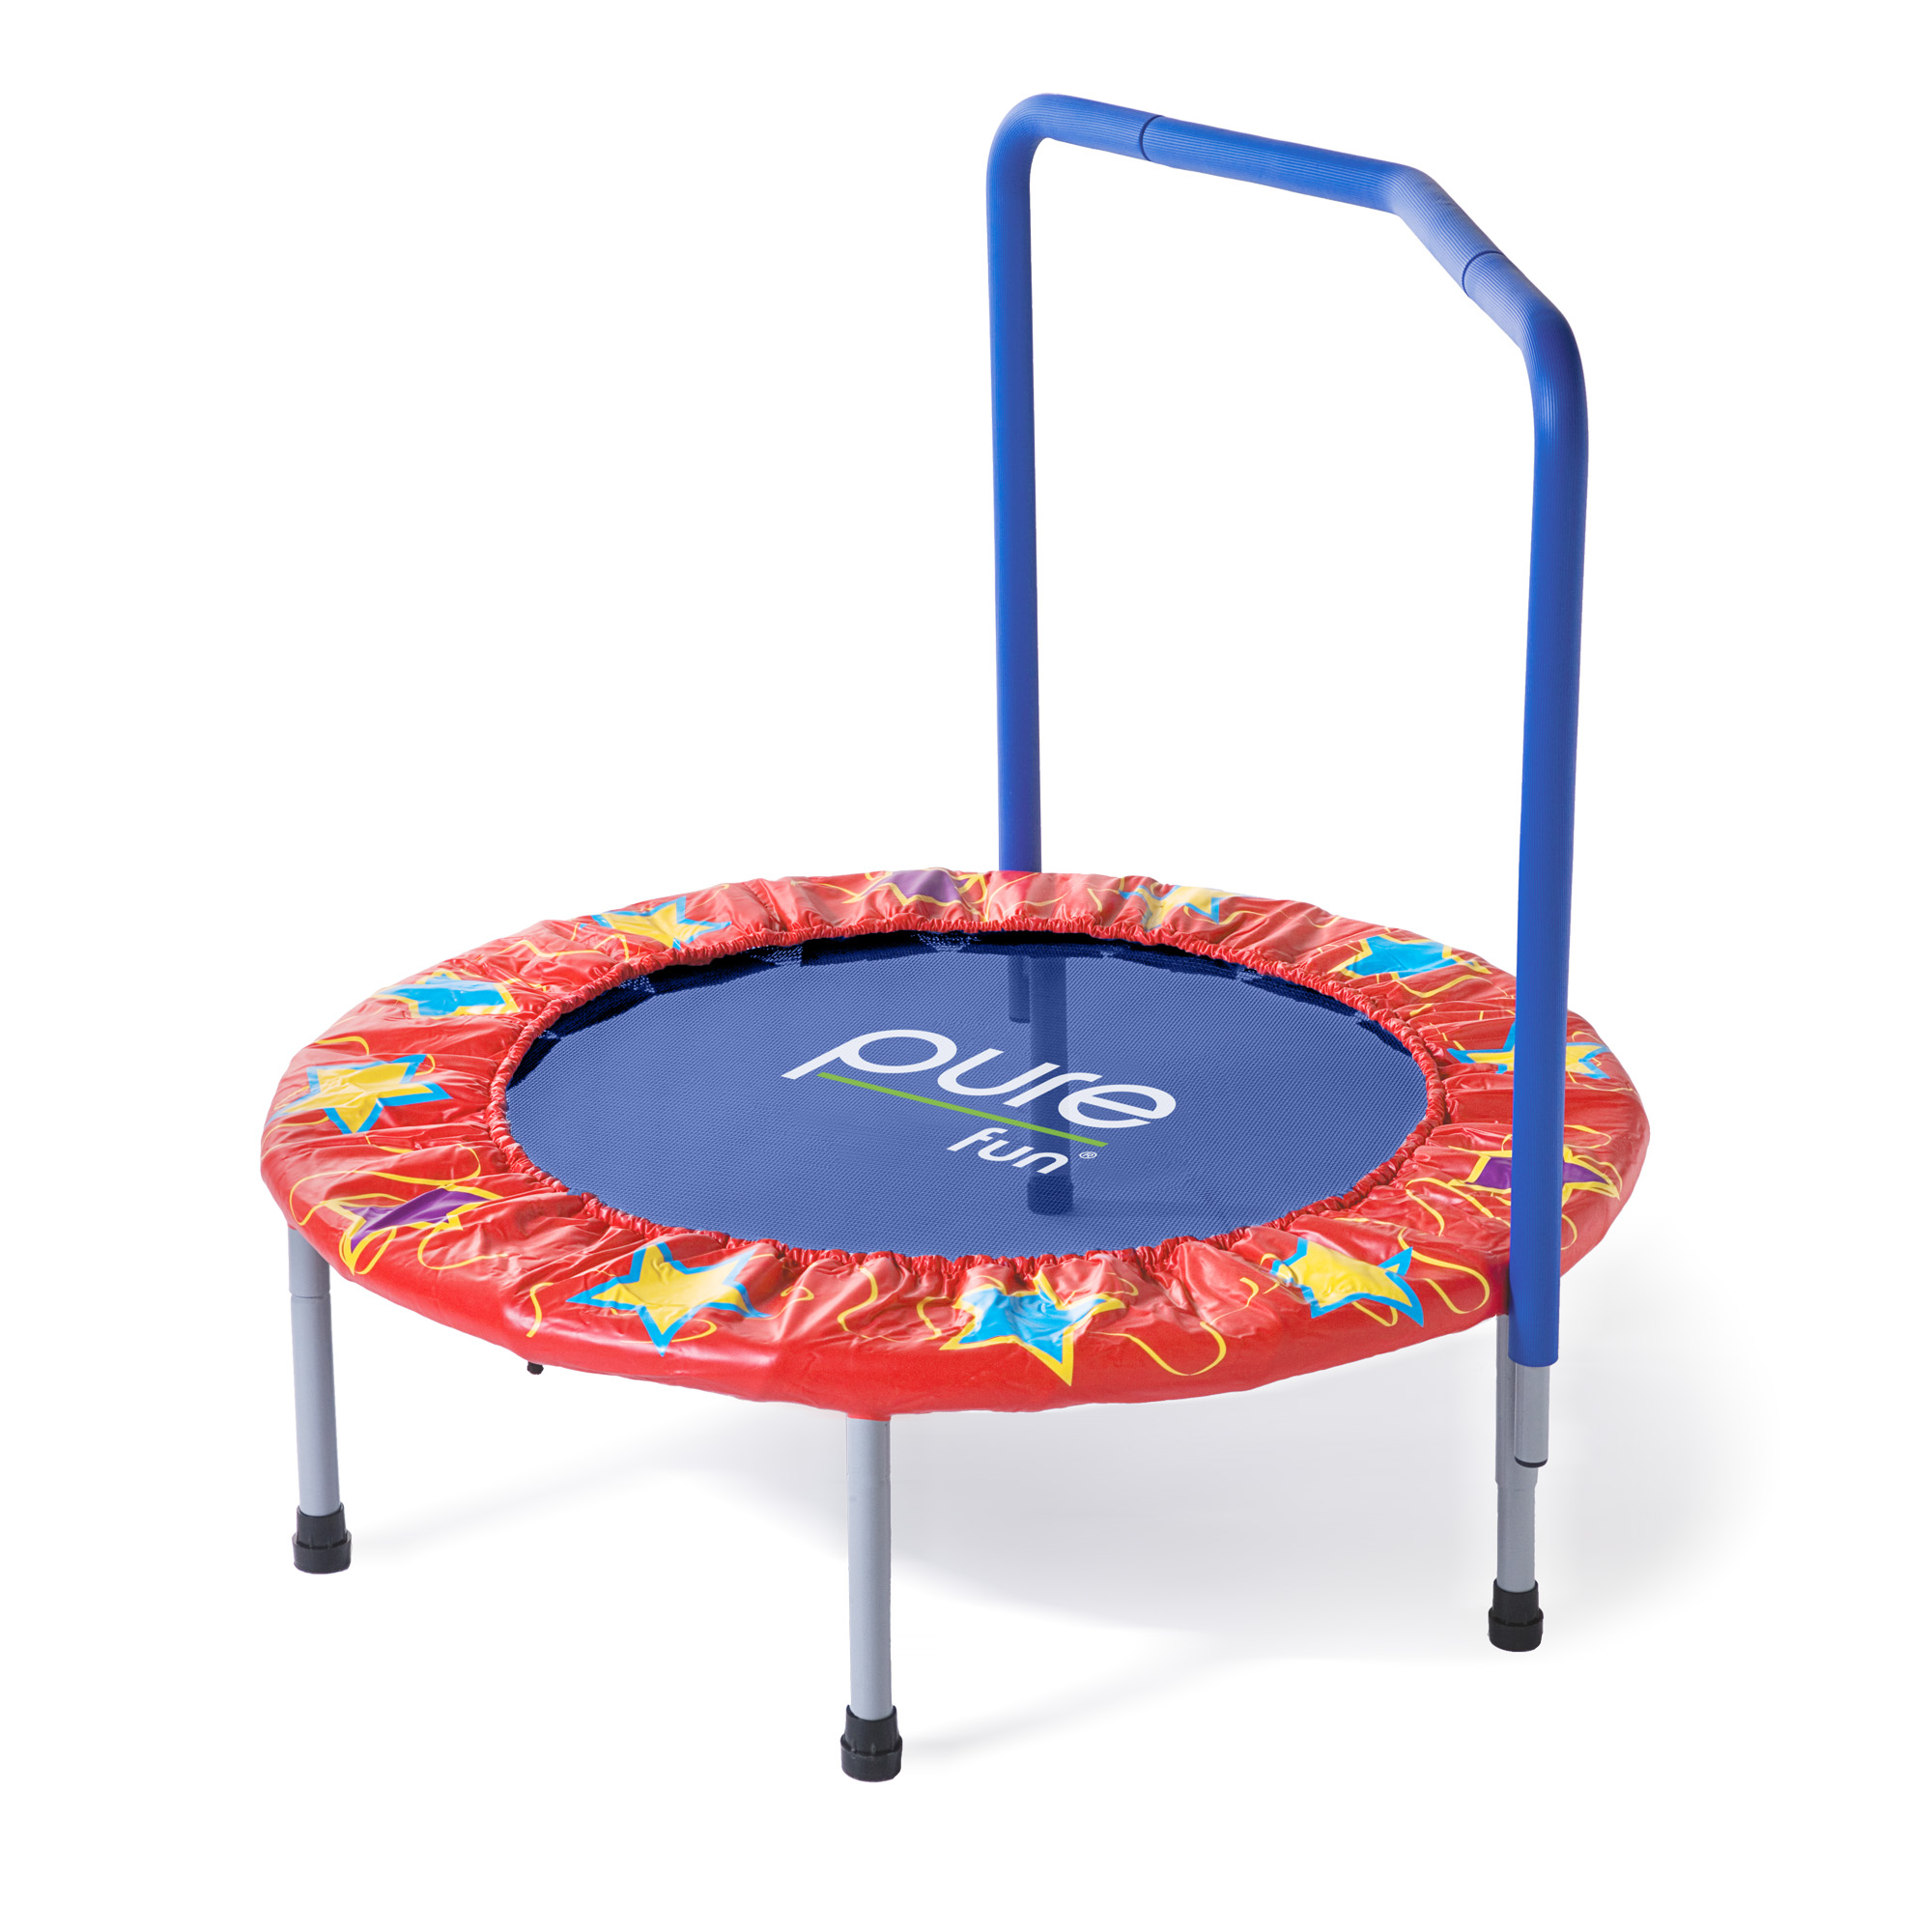 Pure Fun 36-Inch Trampoline for Kids, with Handrail, Red/Blue - image 1 of 4